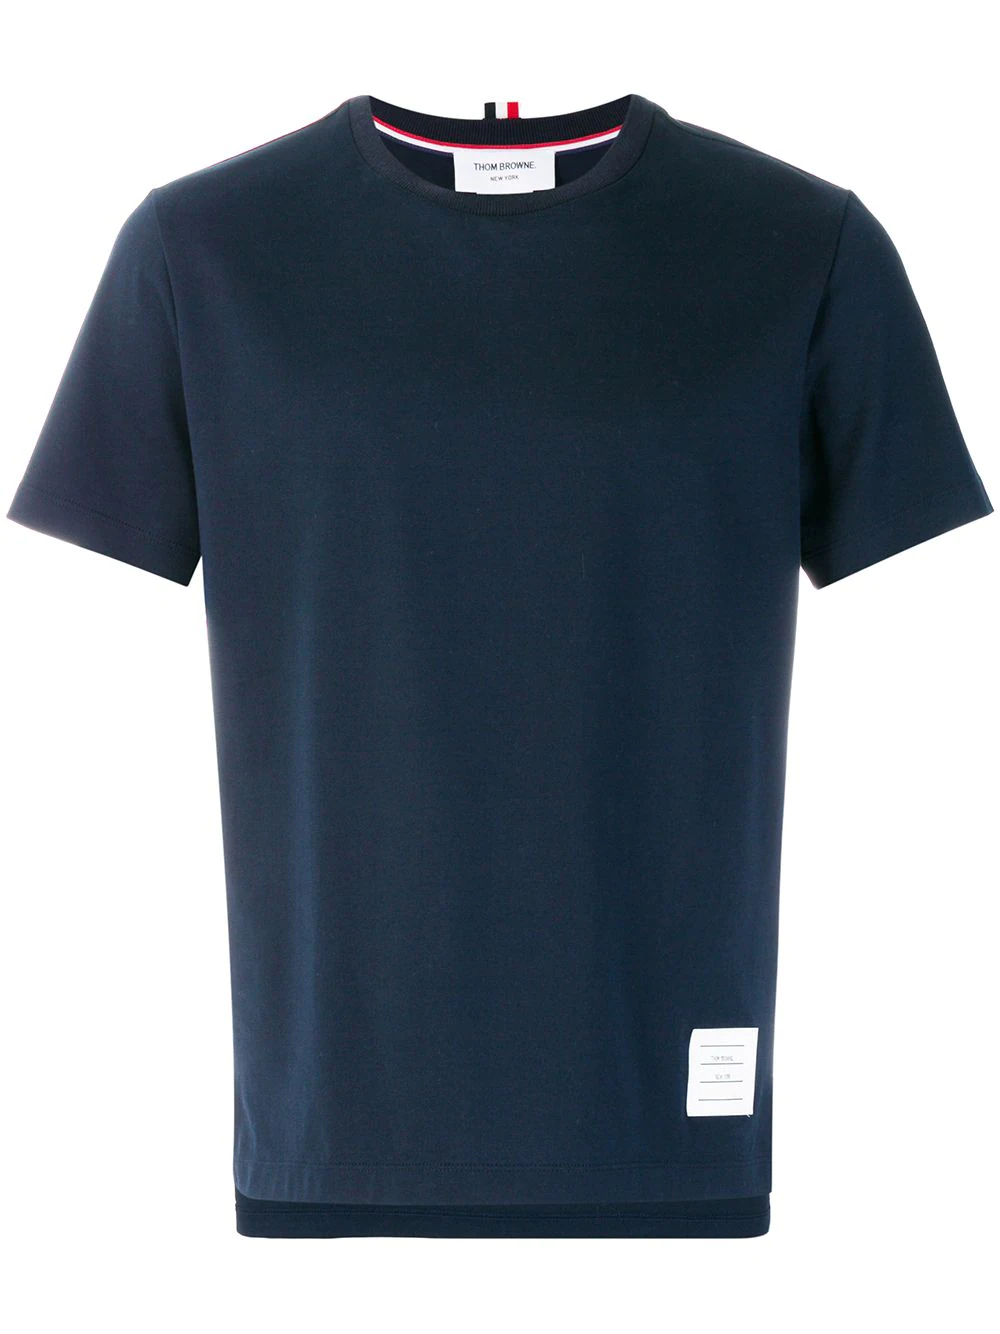 Relaxed Fit Short Sleeve Tee W/ Side Slit In Medium Weight Jersey Navy